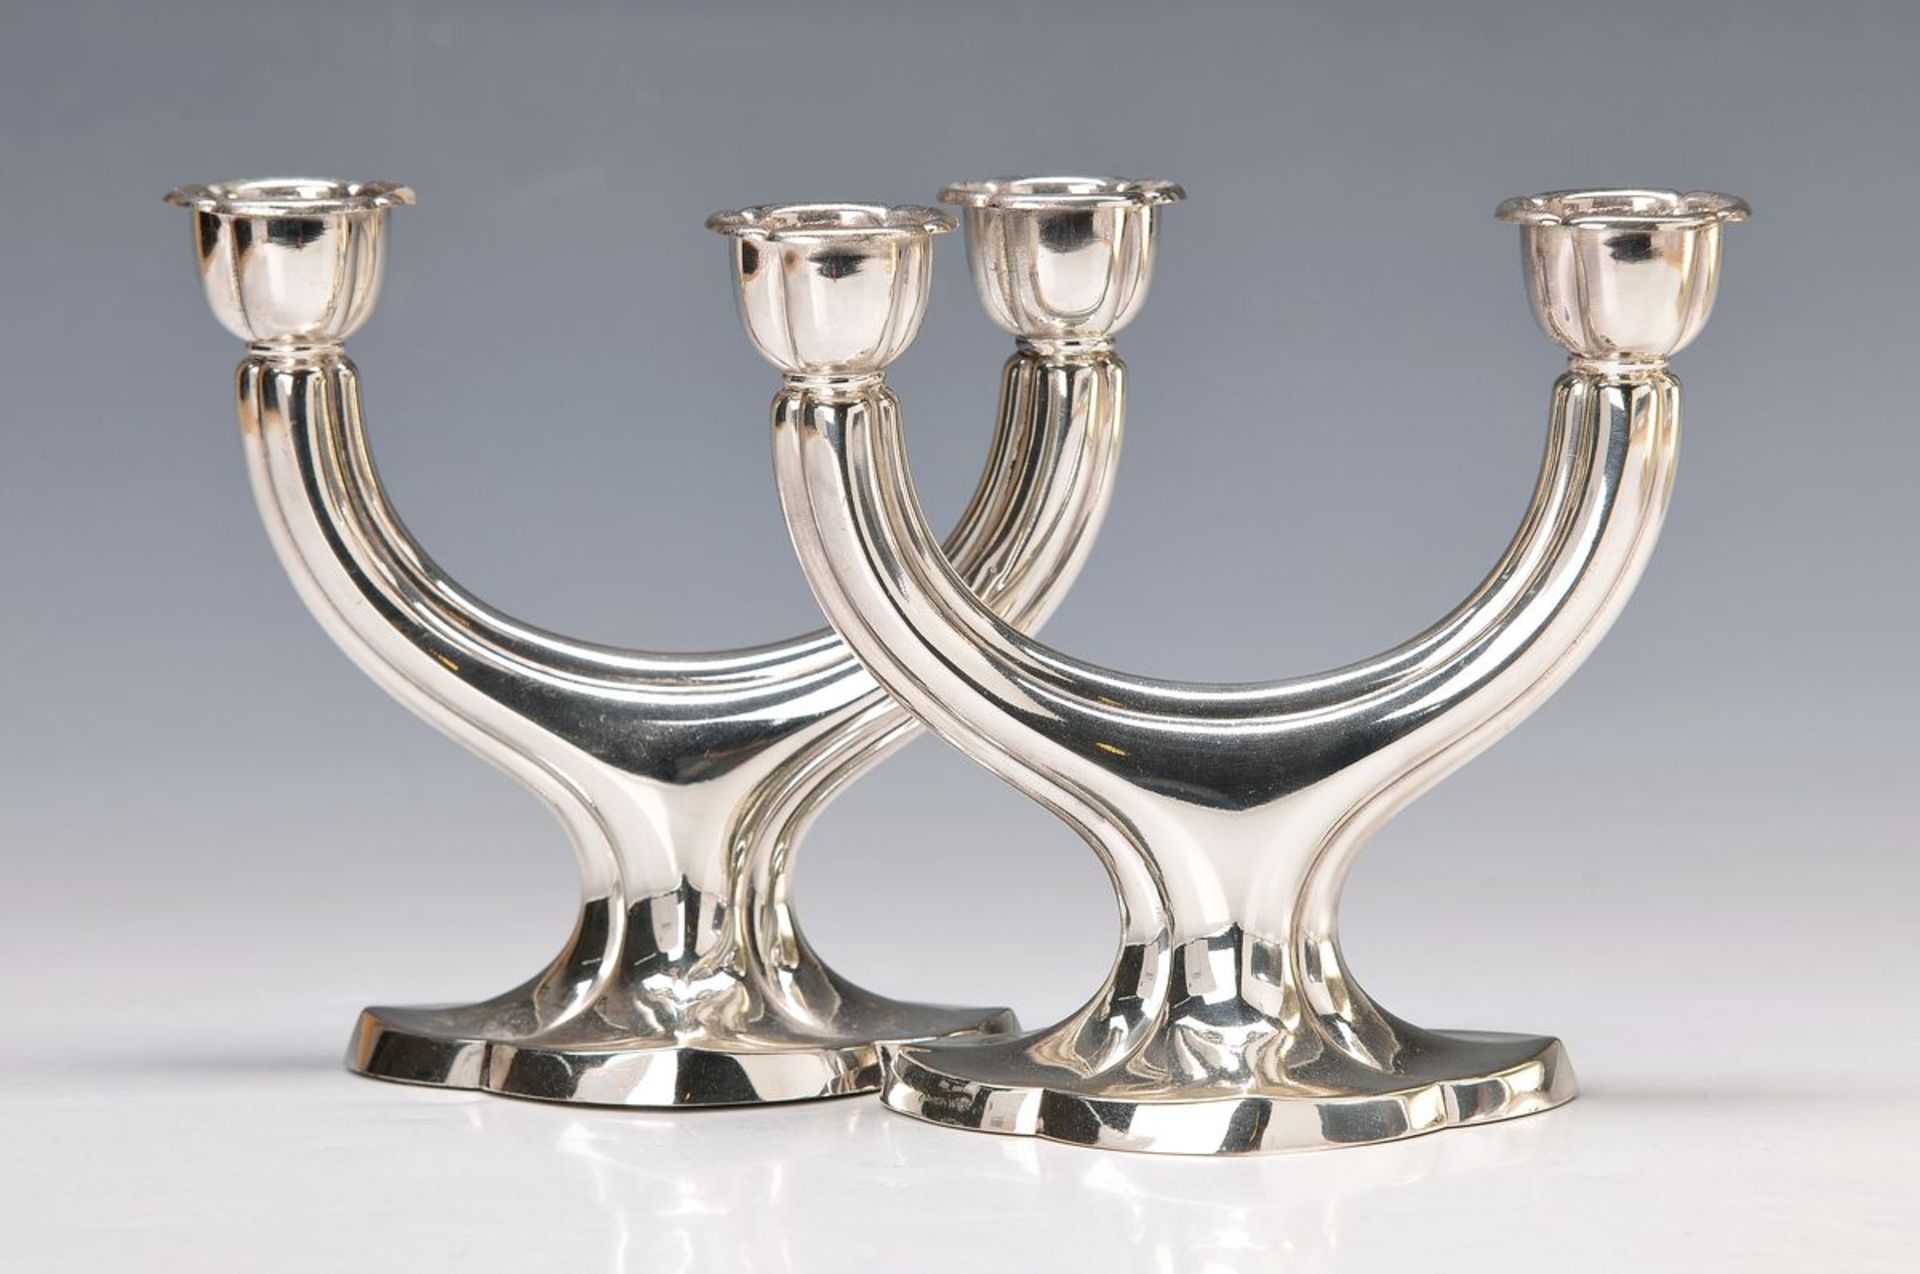 A pair of candlesticks, German, Middle of 20thc., each two focal points, 835 silver, 15 x 16.5 cm,